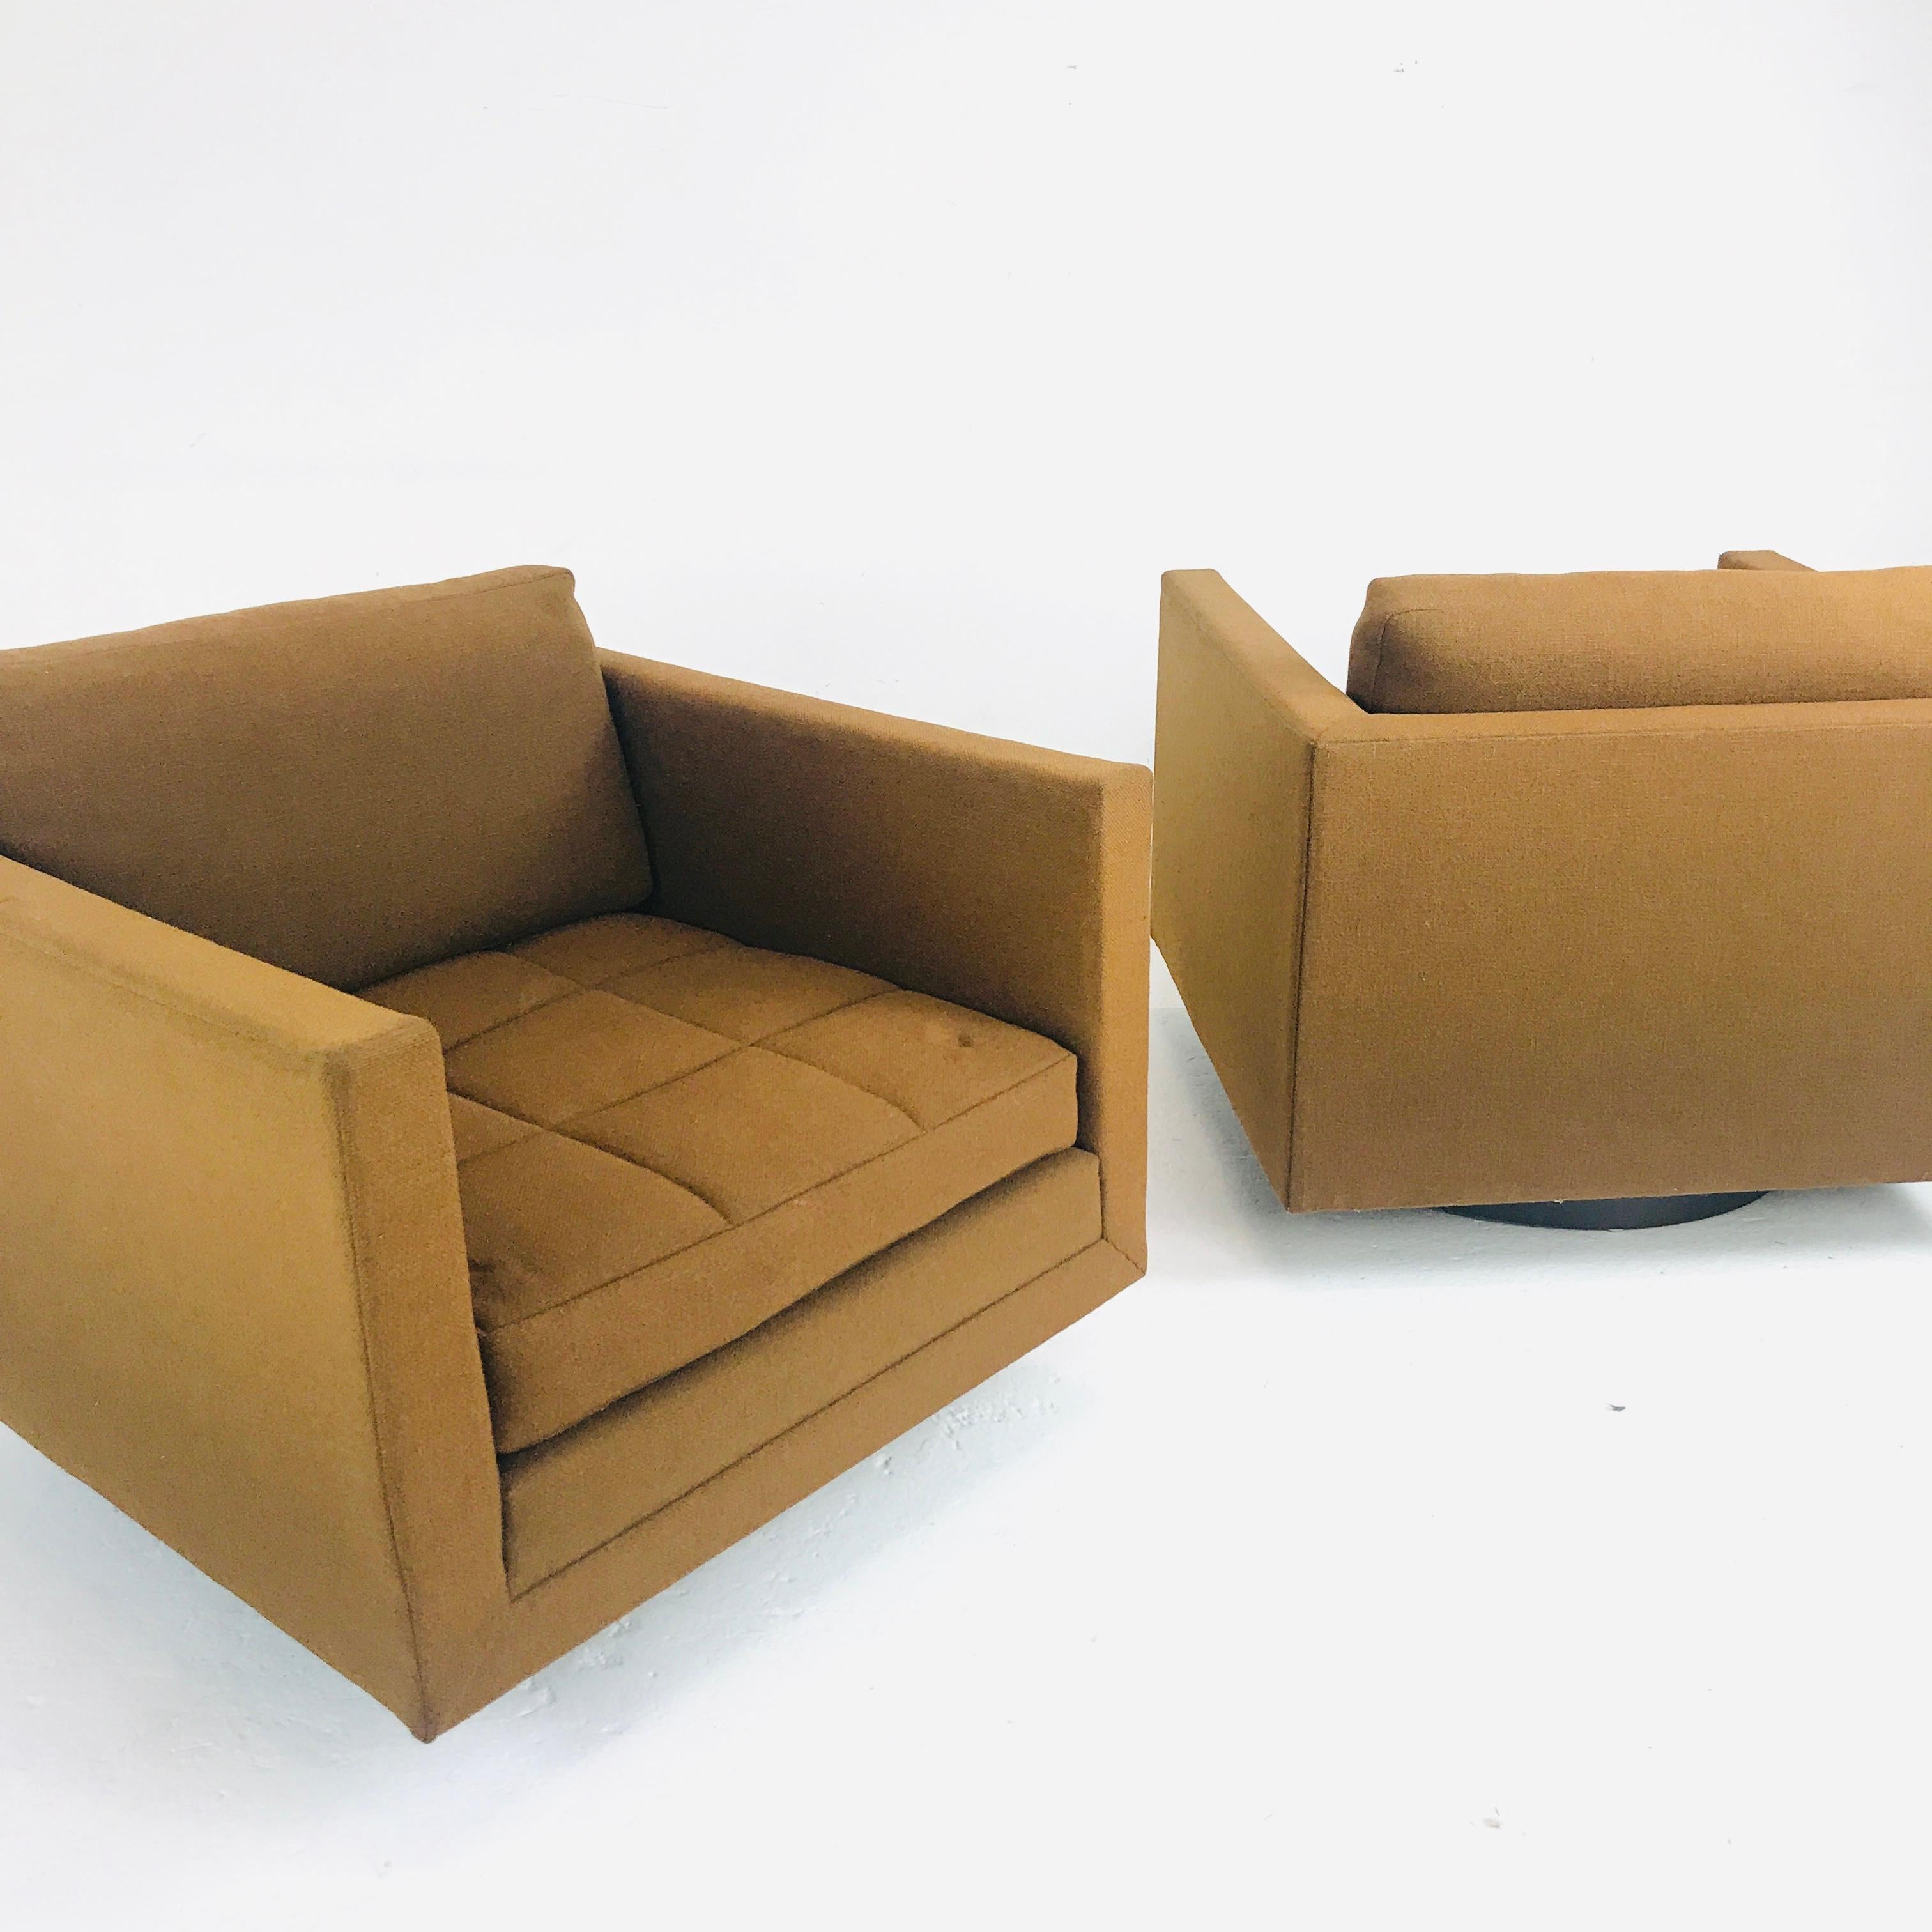 Pair of Harvey Probber Cube Swivel Chairs, Signed (Polster)